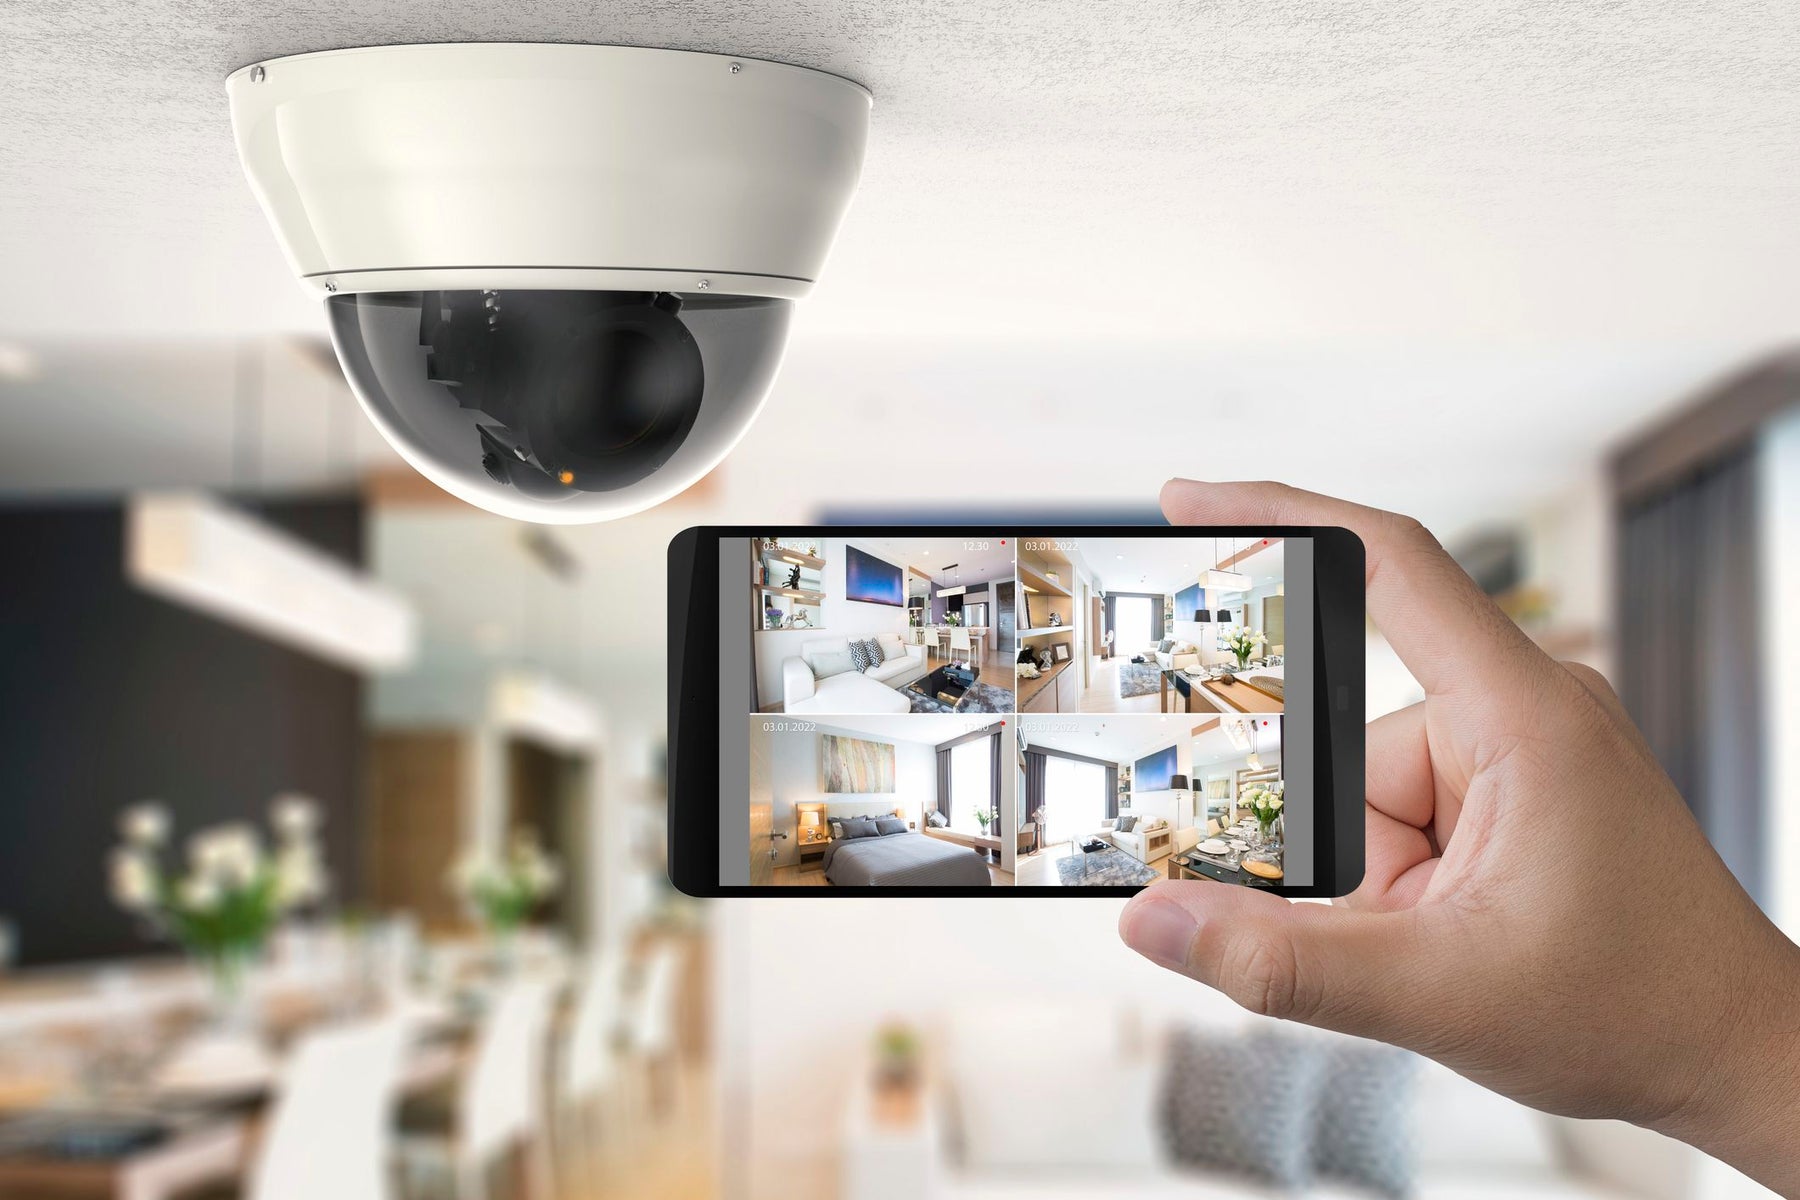 What Is The Big Deal About Fake Security Cameras?